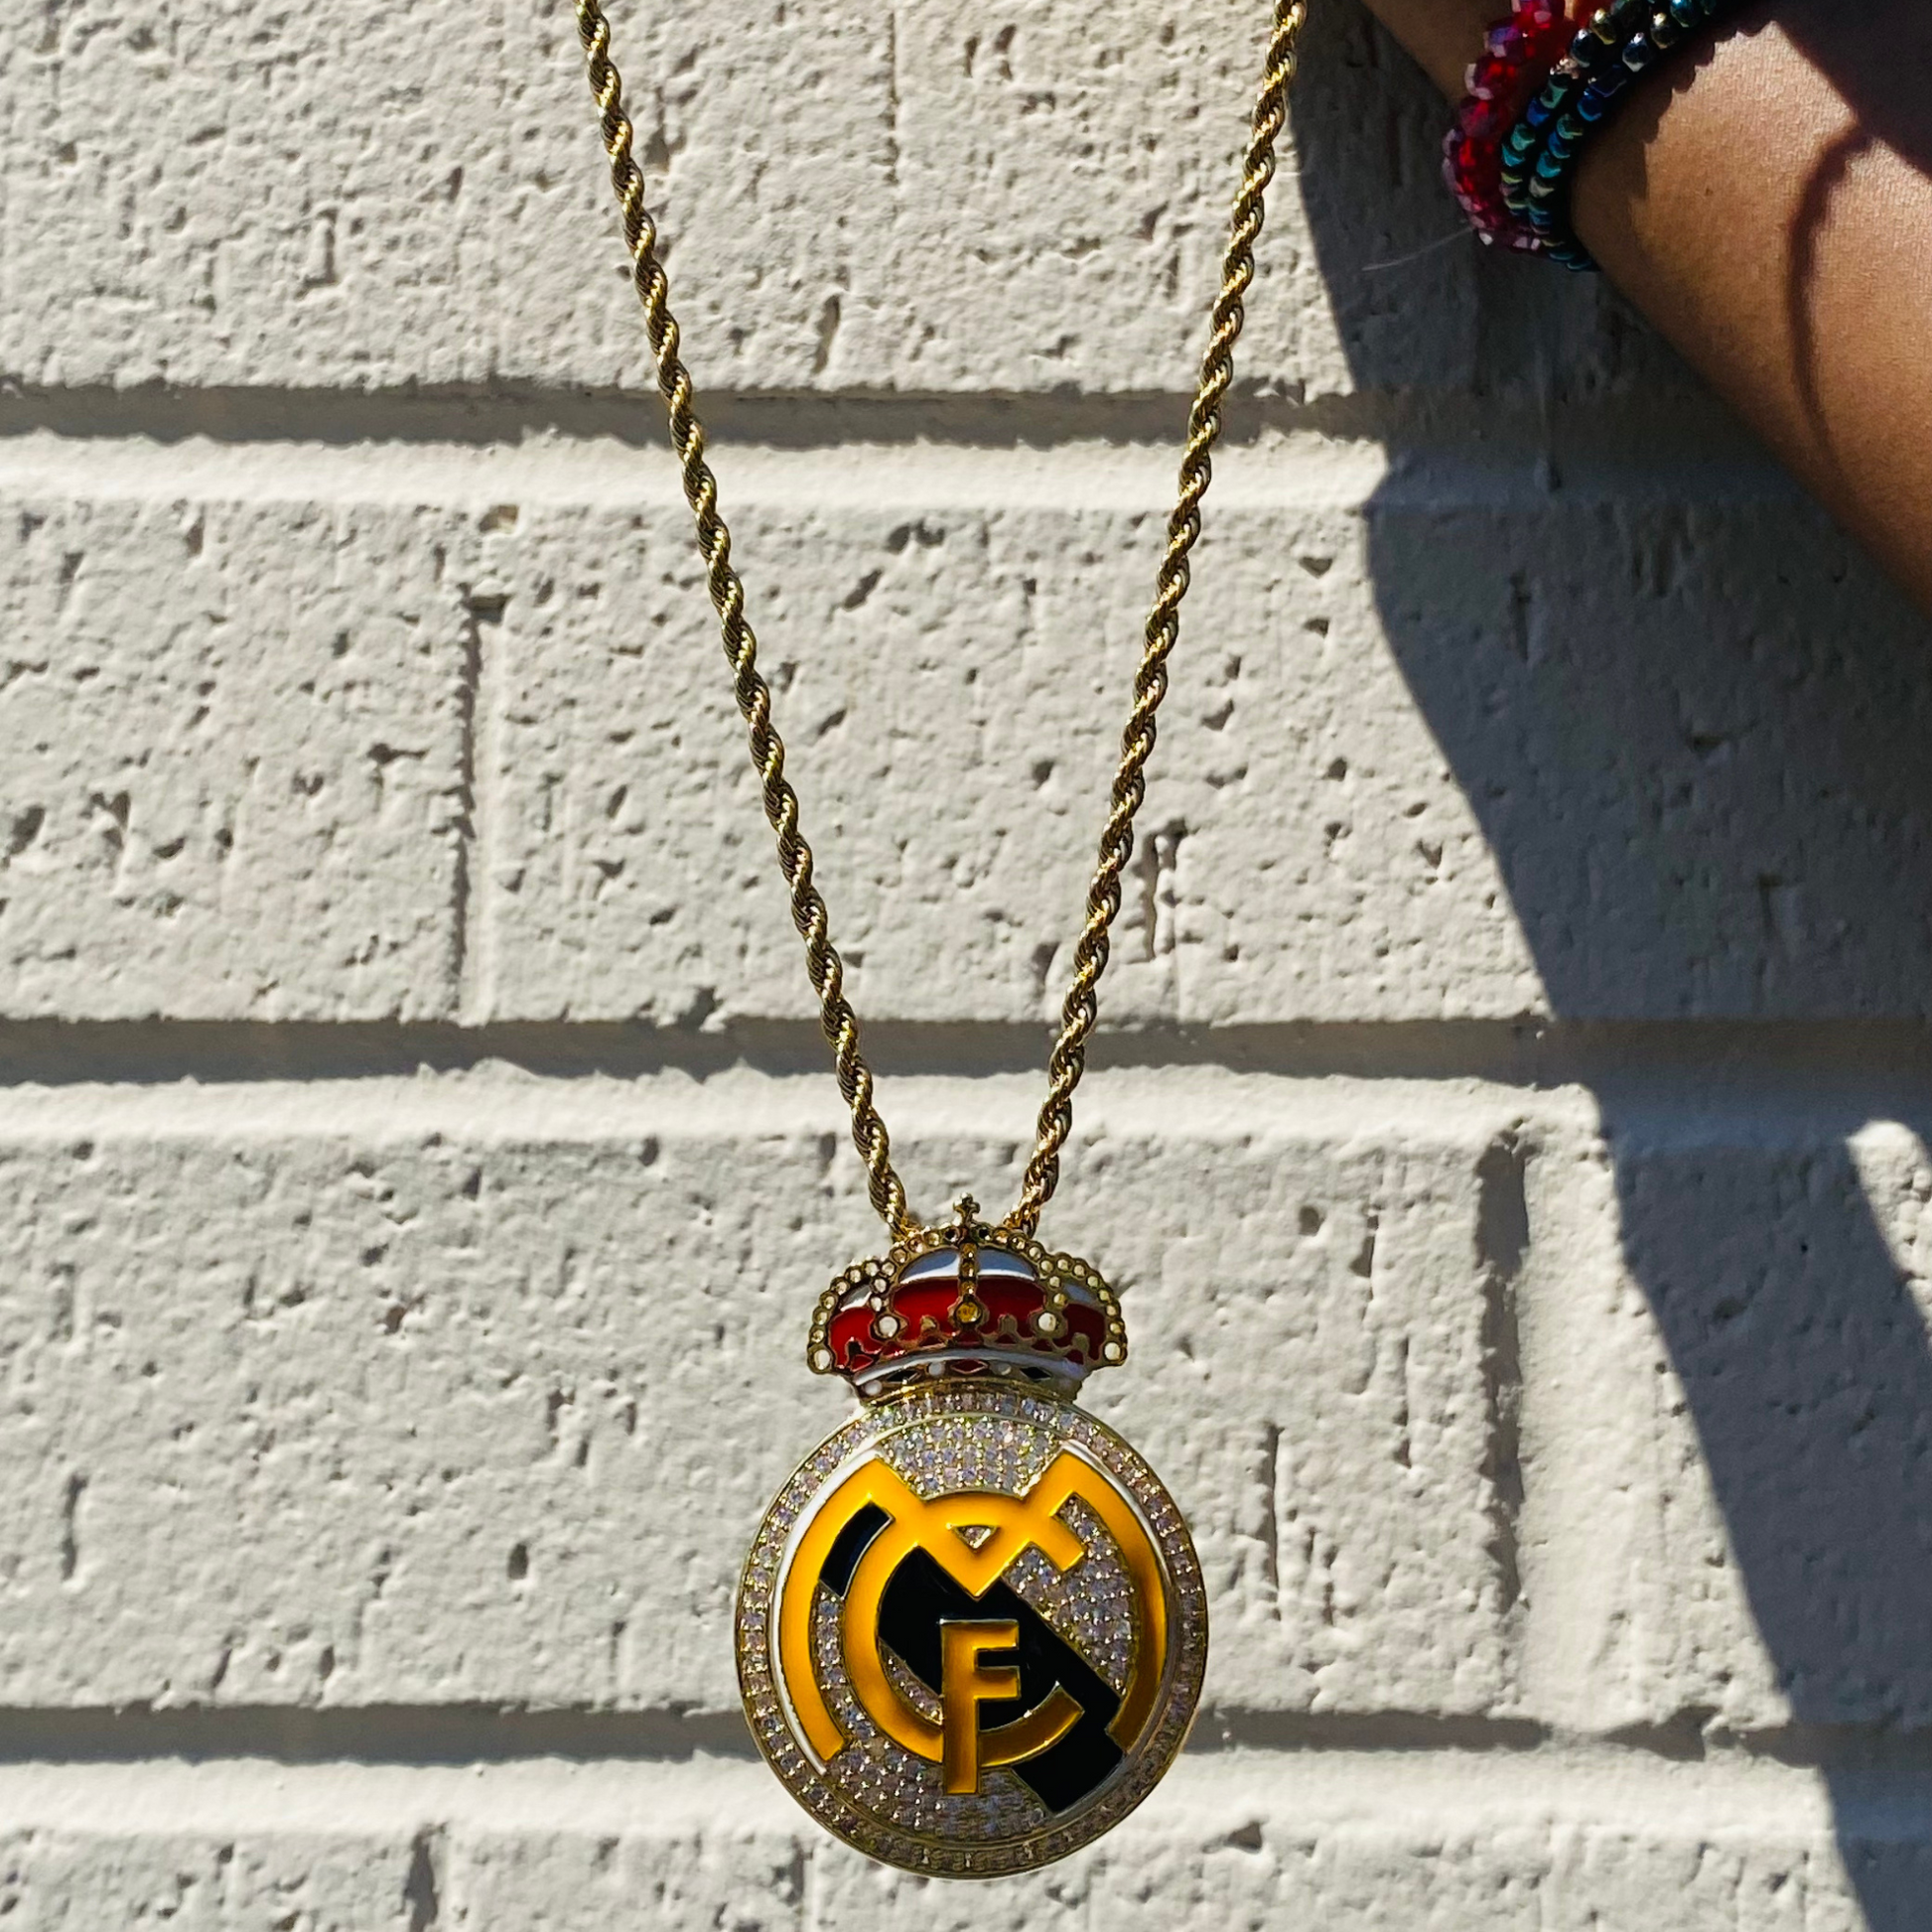 Real Madrid necklace with Real Madrid badge pendant. Soccer Necklace.